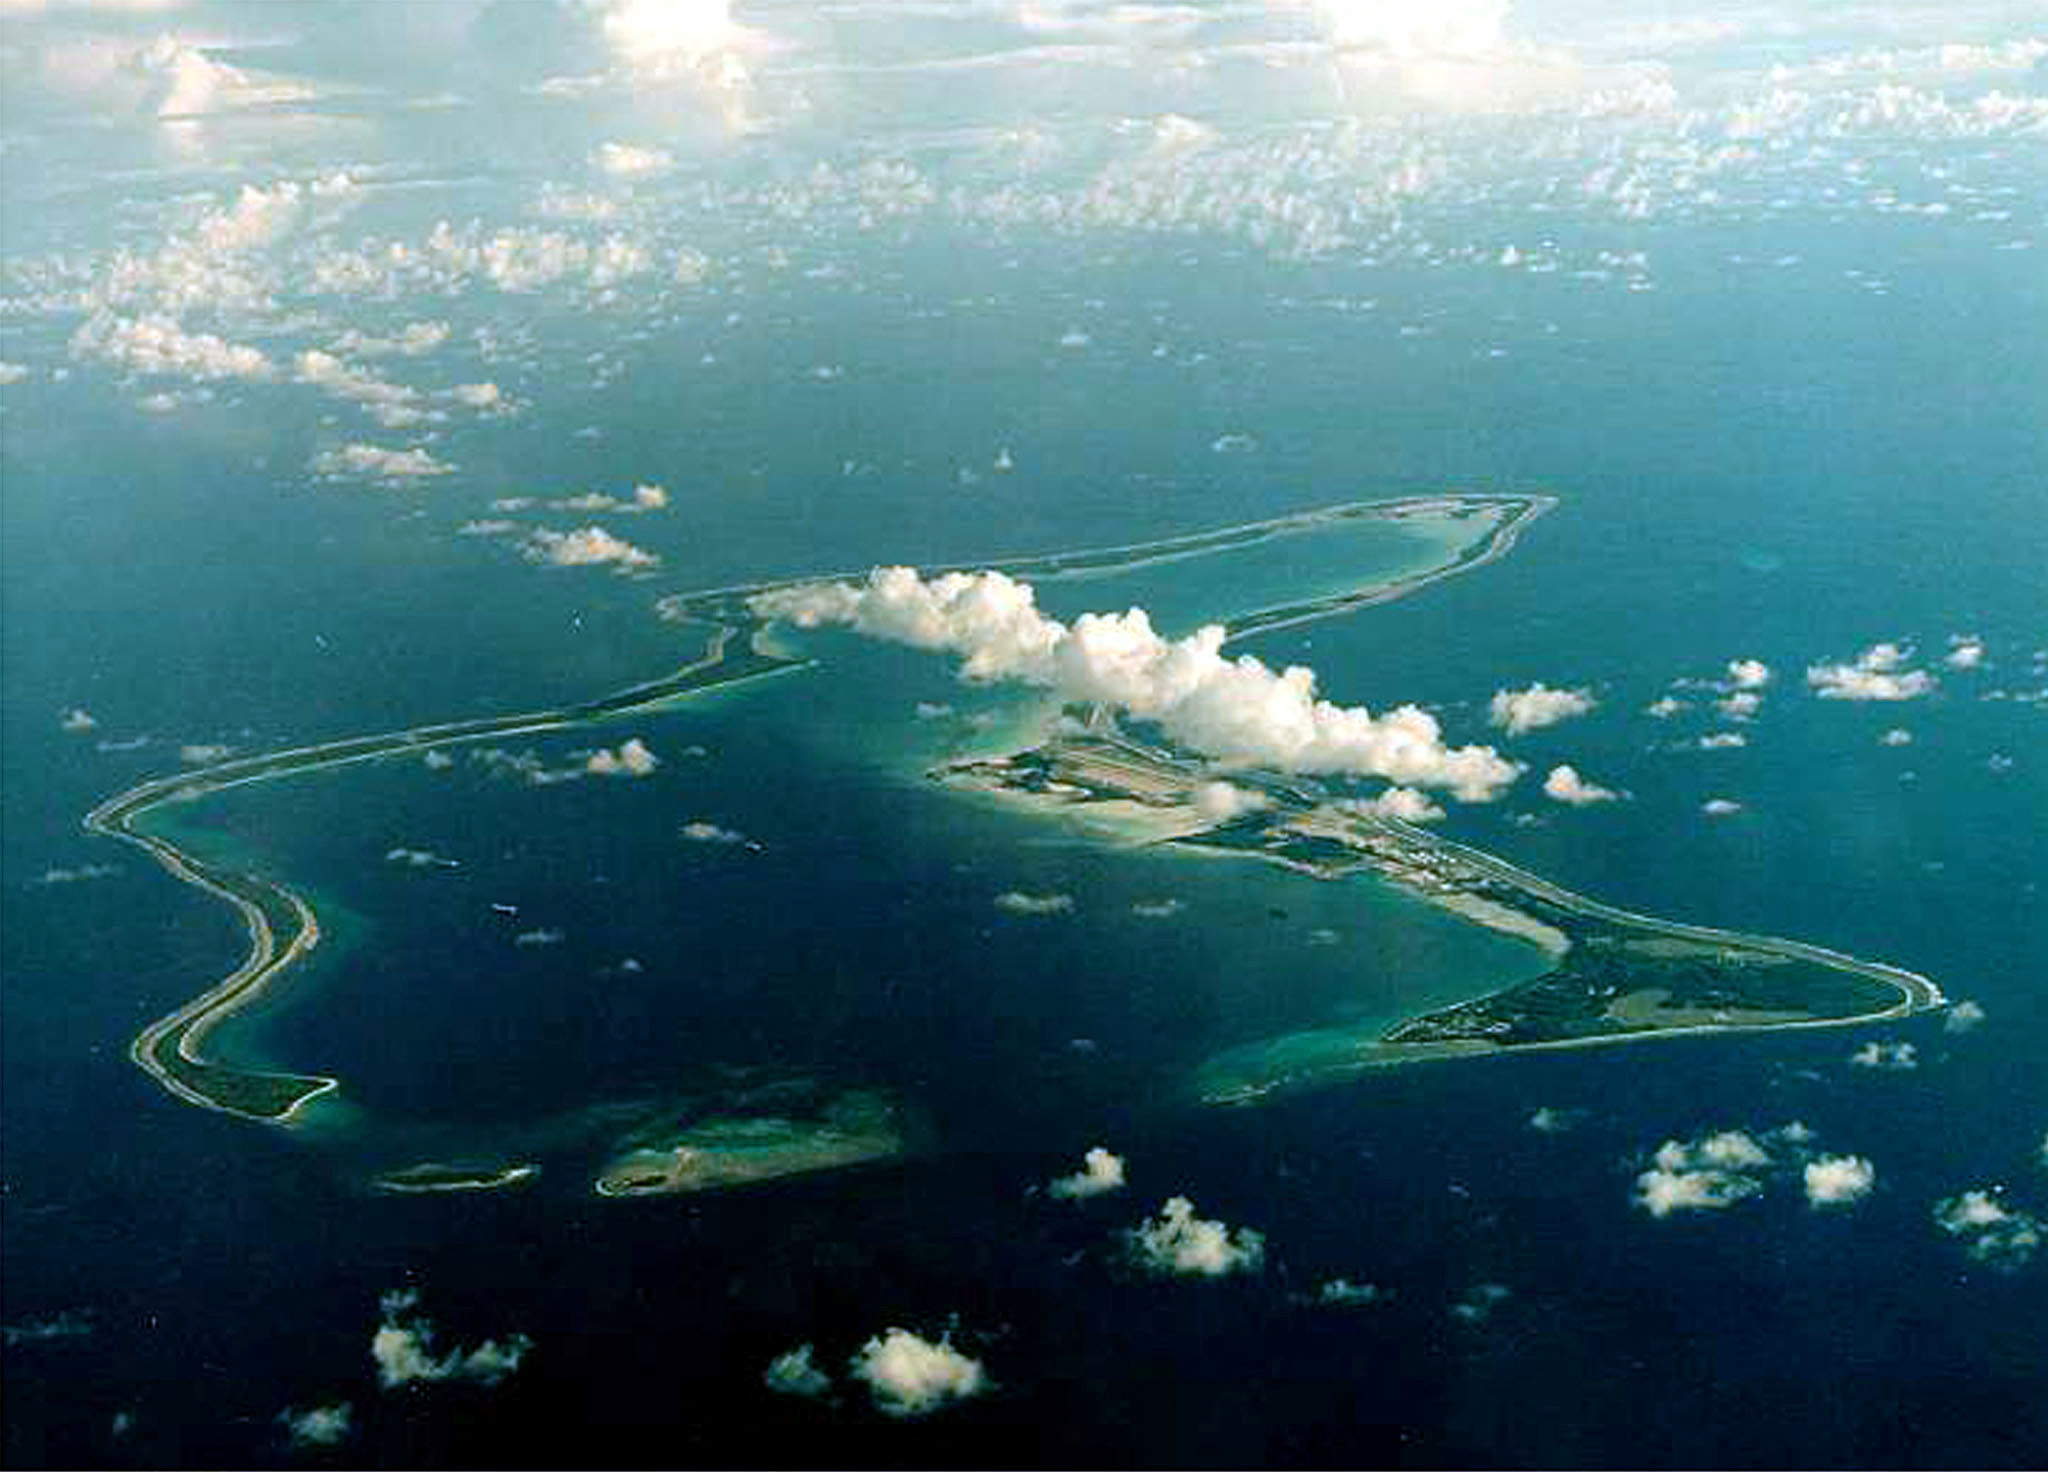 An undated file photo shows Diego Garcia, the largest island in the Chagos archipelago and site of a major United States military base